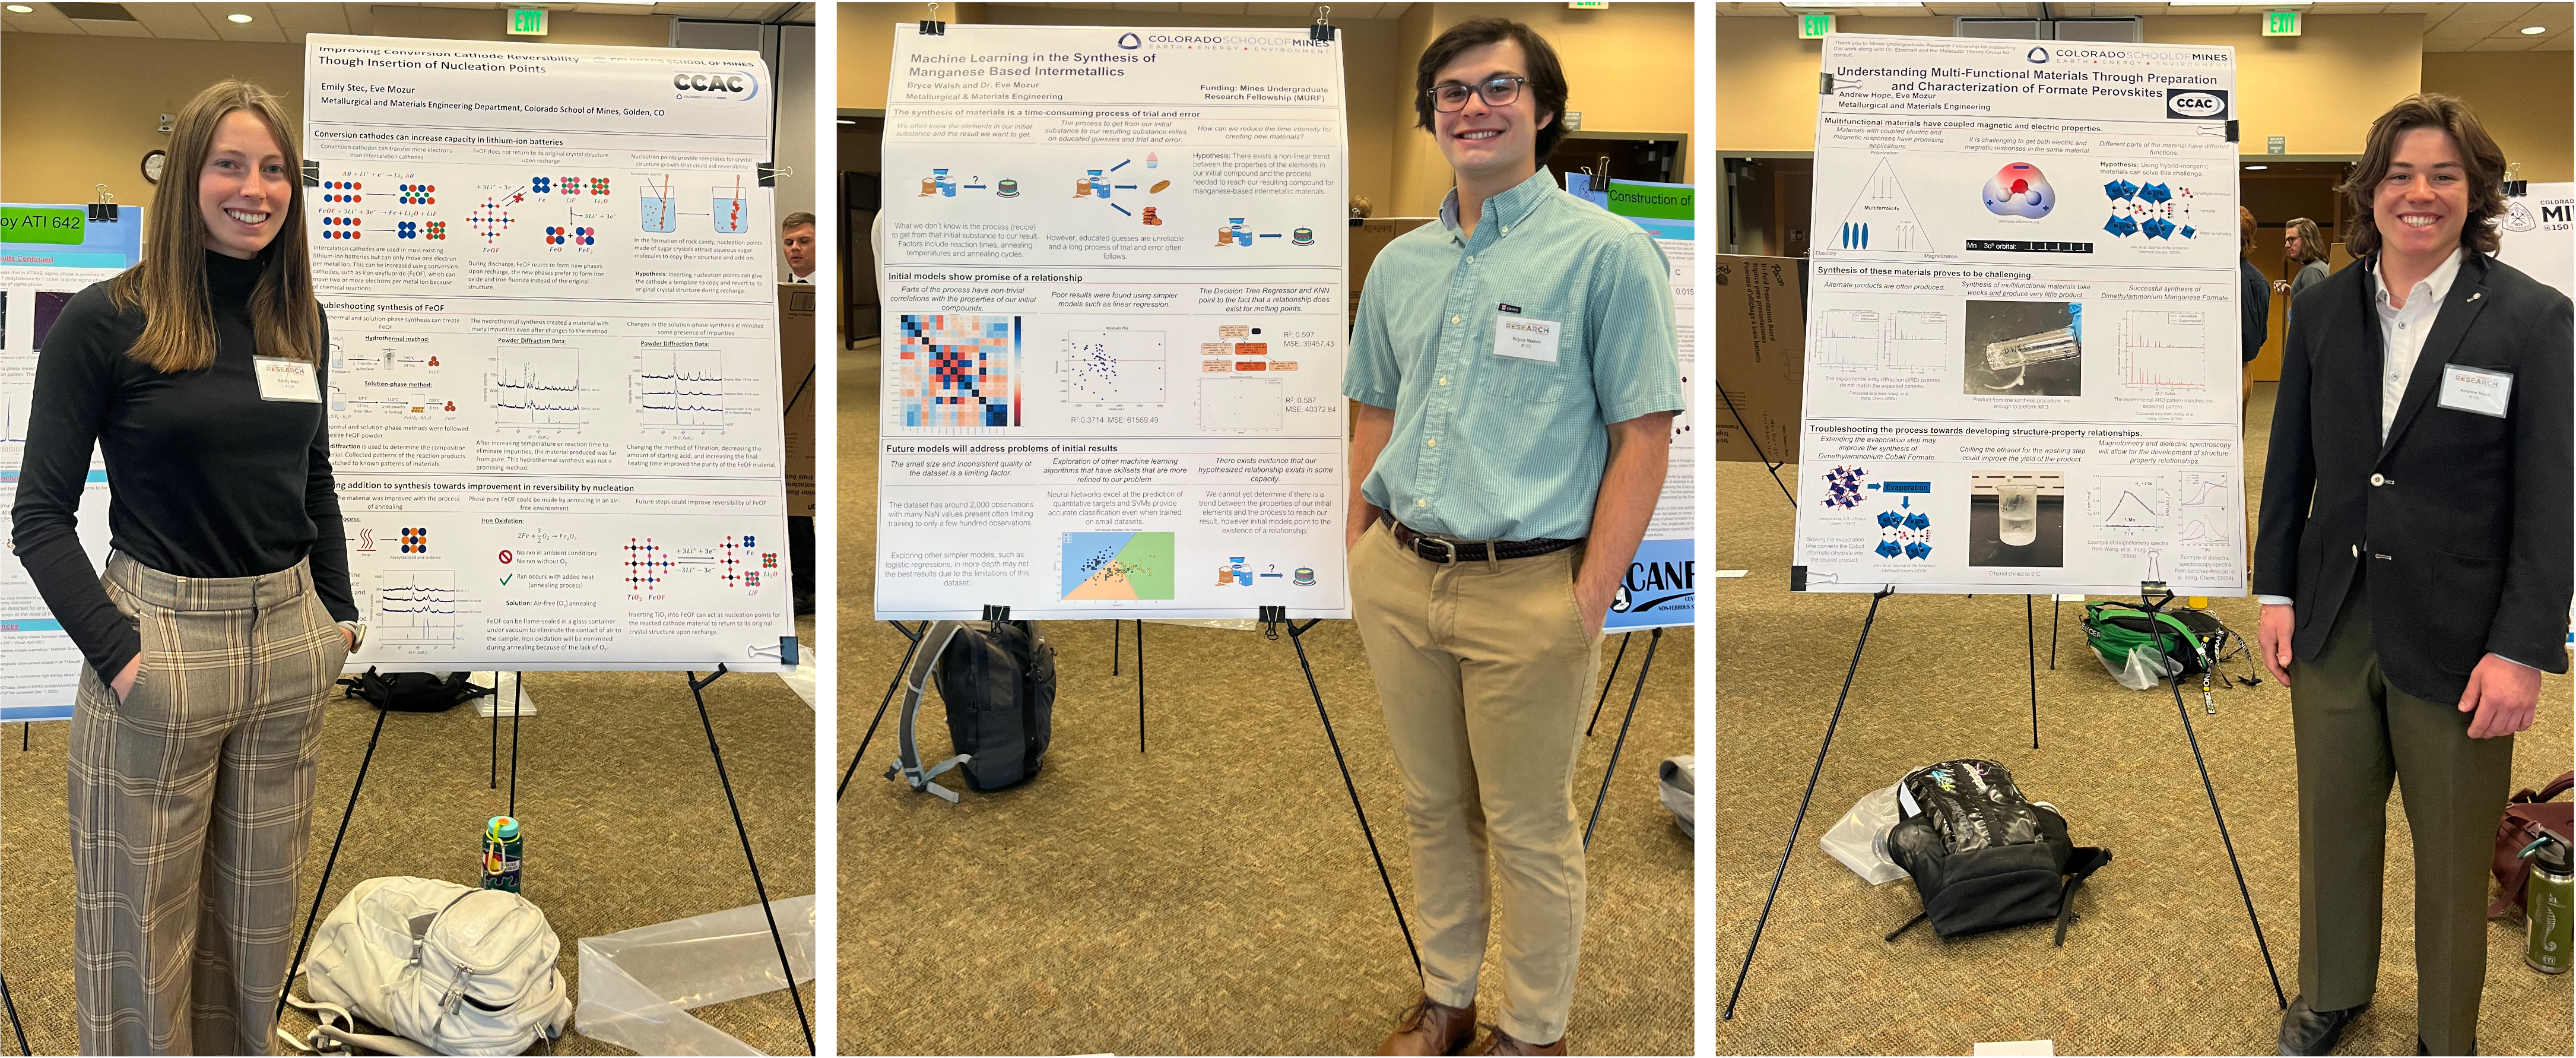 Emily, Bryce, and Andrew standing next to their their research posters. All three are looking at the camera and smiling.